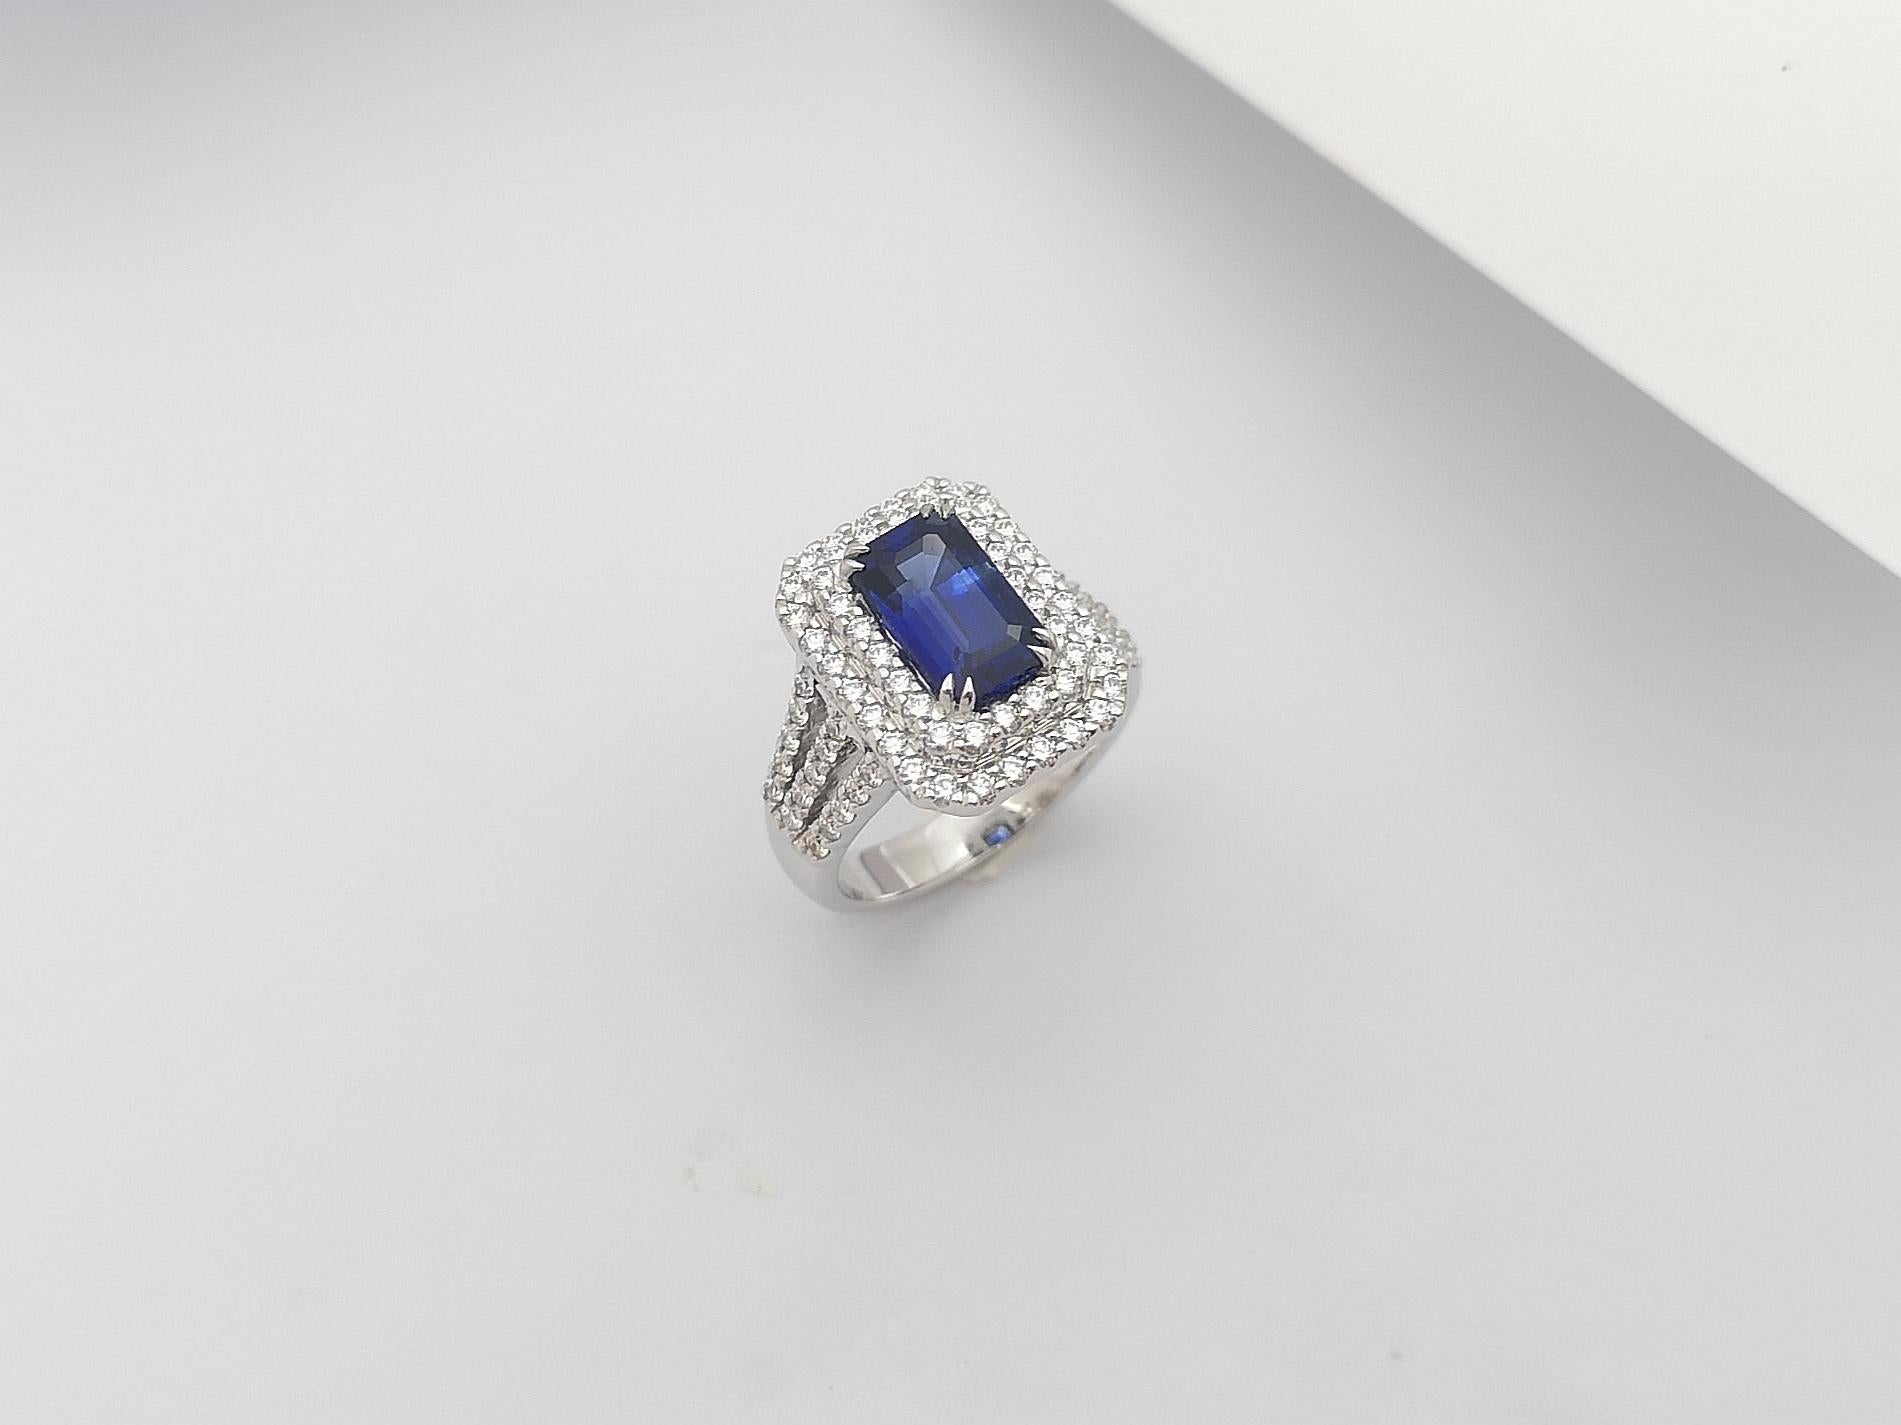 GIA Certified 3 Cts Blue Sapphire with Diamond Ring Set in 18 Karat White Gold For Sale 11